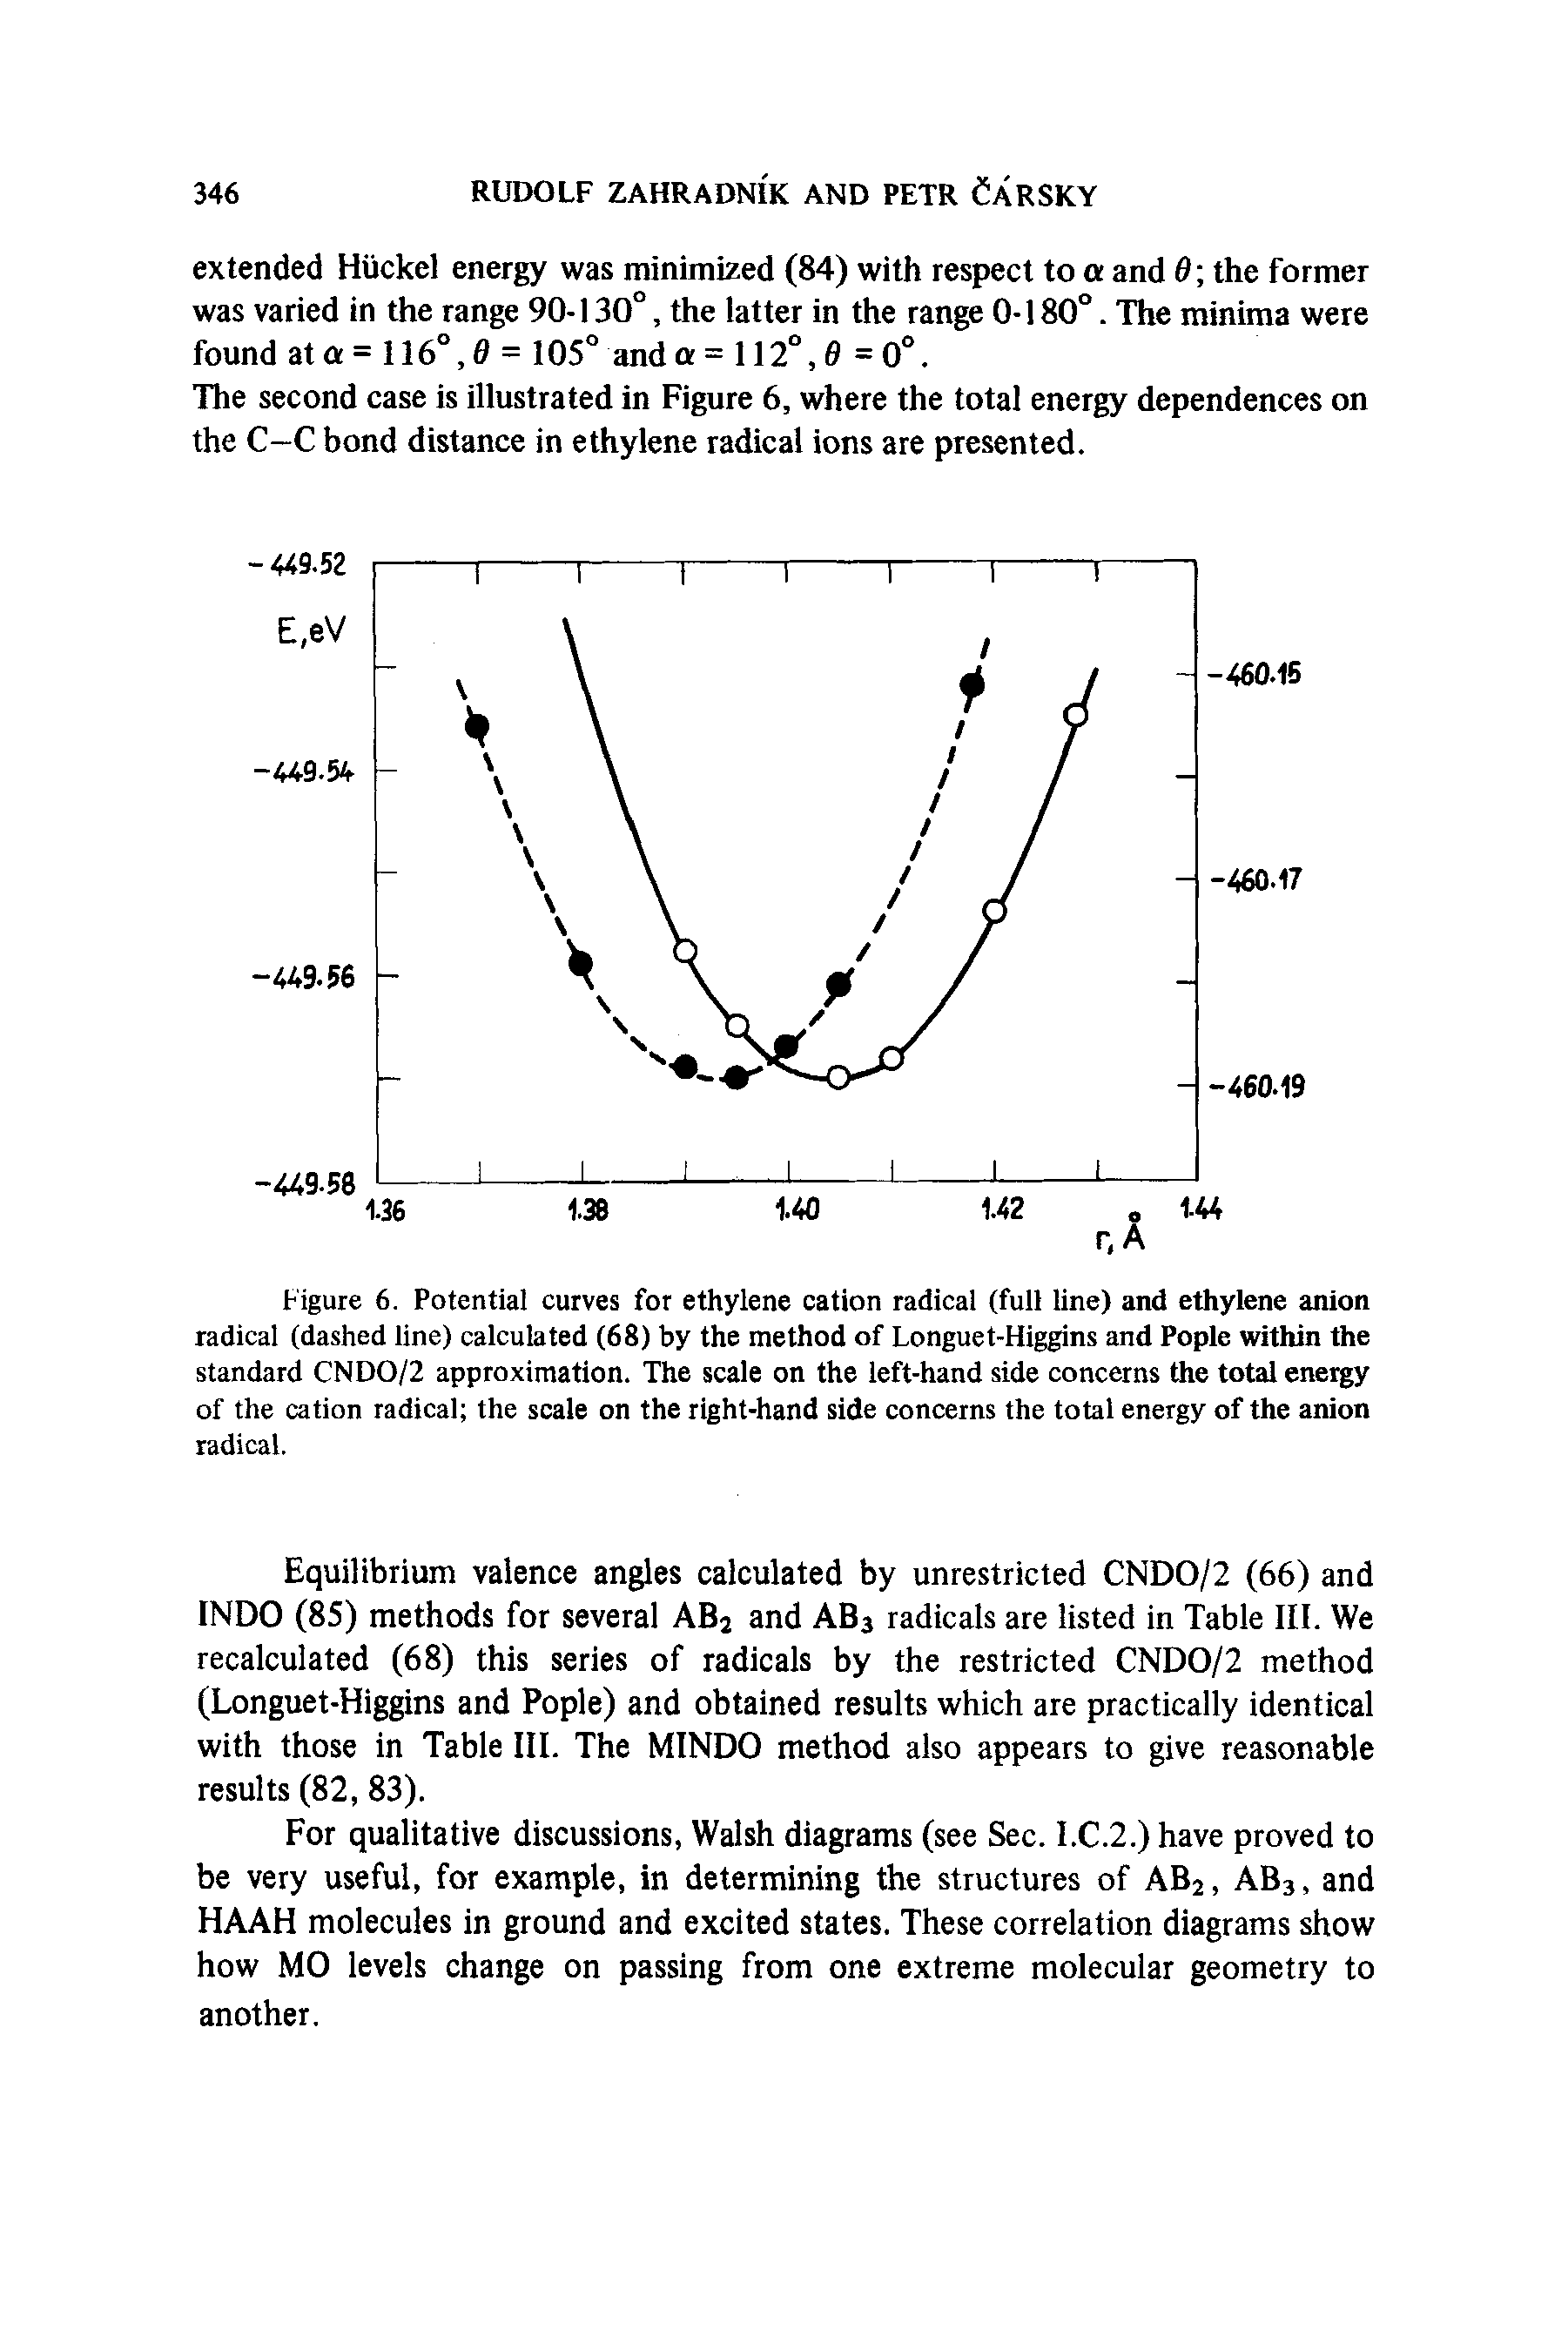 Figure 6. Potential curves for ethylene cation radical (full line) and ethylene anion radical (dashed line) calculated (68) by the method of Longuet-Higgins and Pople within the standard CNDO/2 approximation. The scale on the left-hand side concerns the total energy of the cation radical the scale on the right-hand side concerns the total energy of the anion radical.